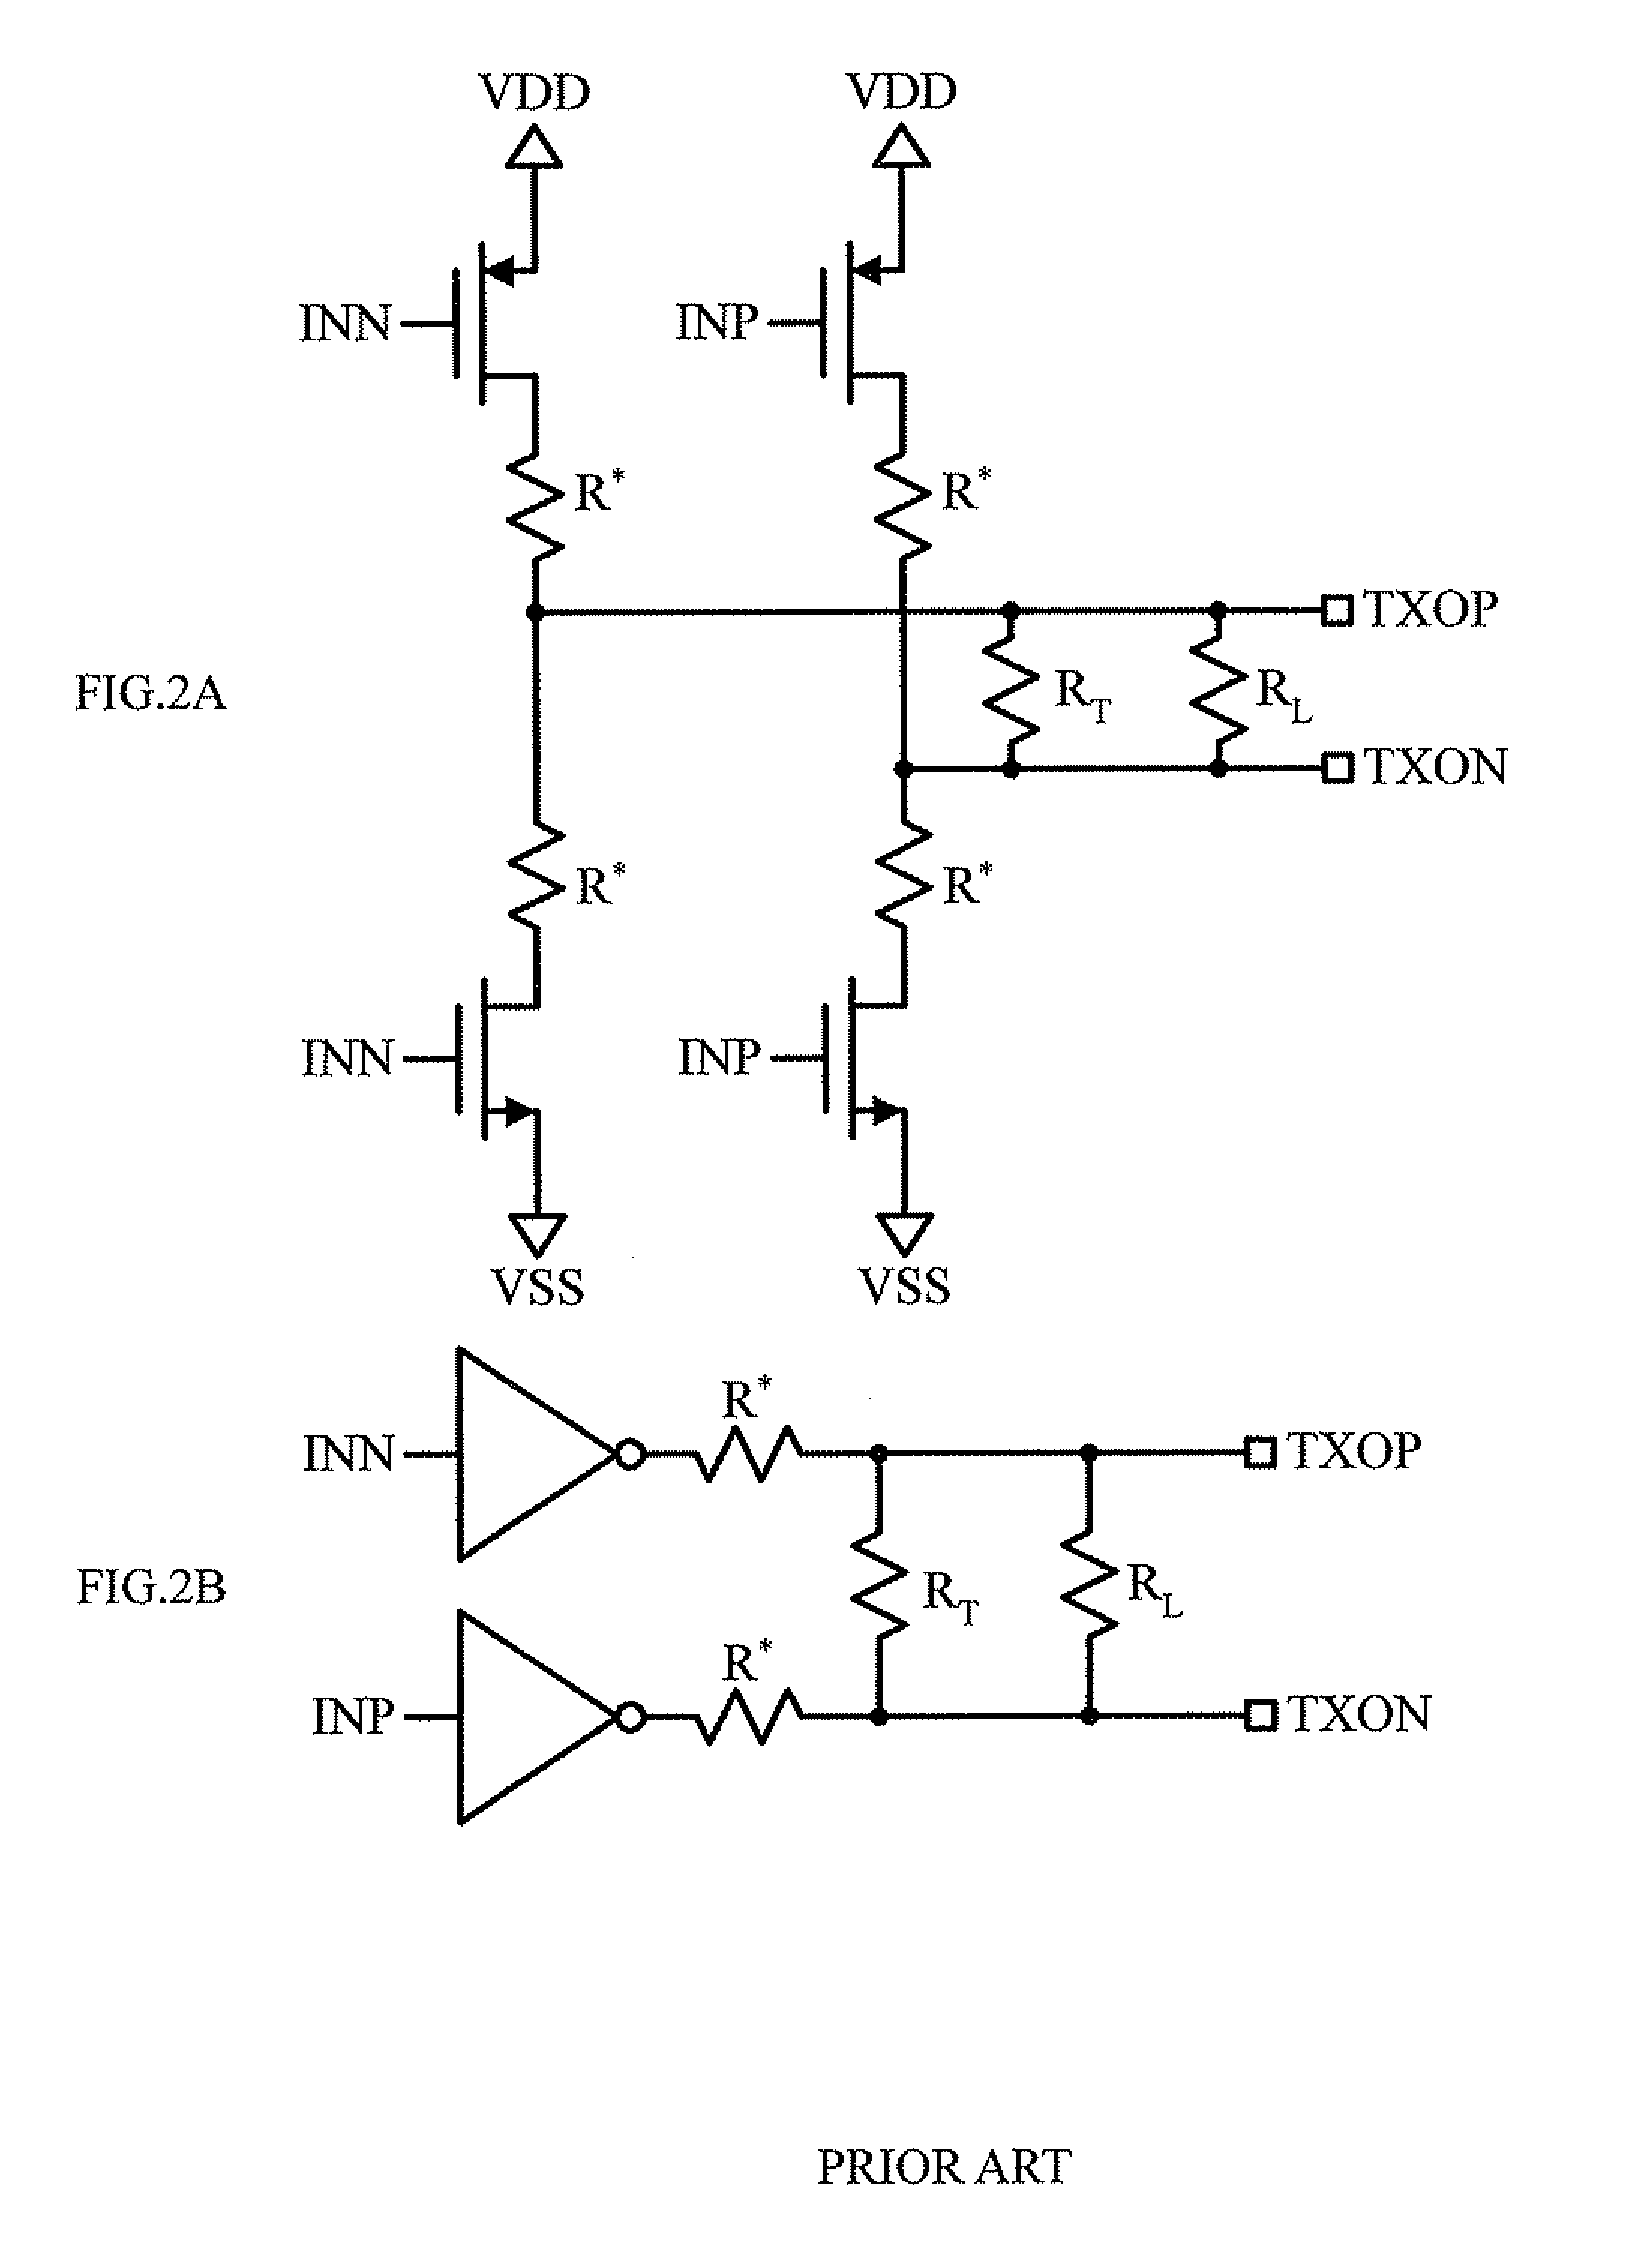 Configurable Voltage Mode Transmitted Architecture With Common-Mode Adjustment And Novel Pre-Emphasis